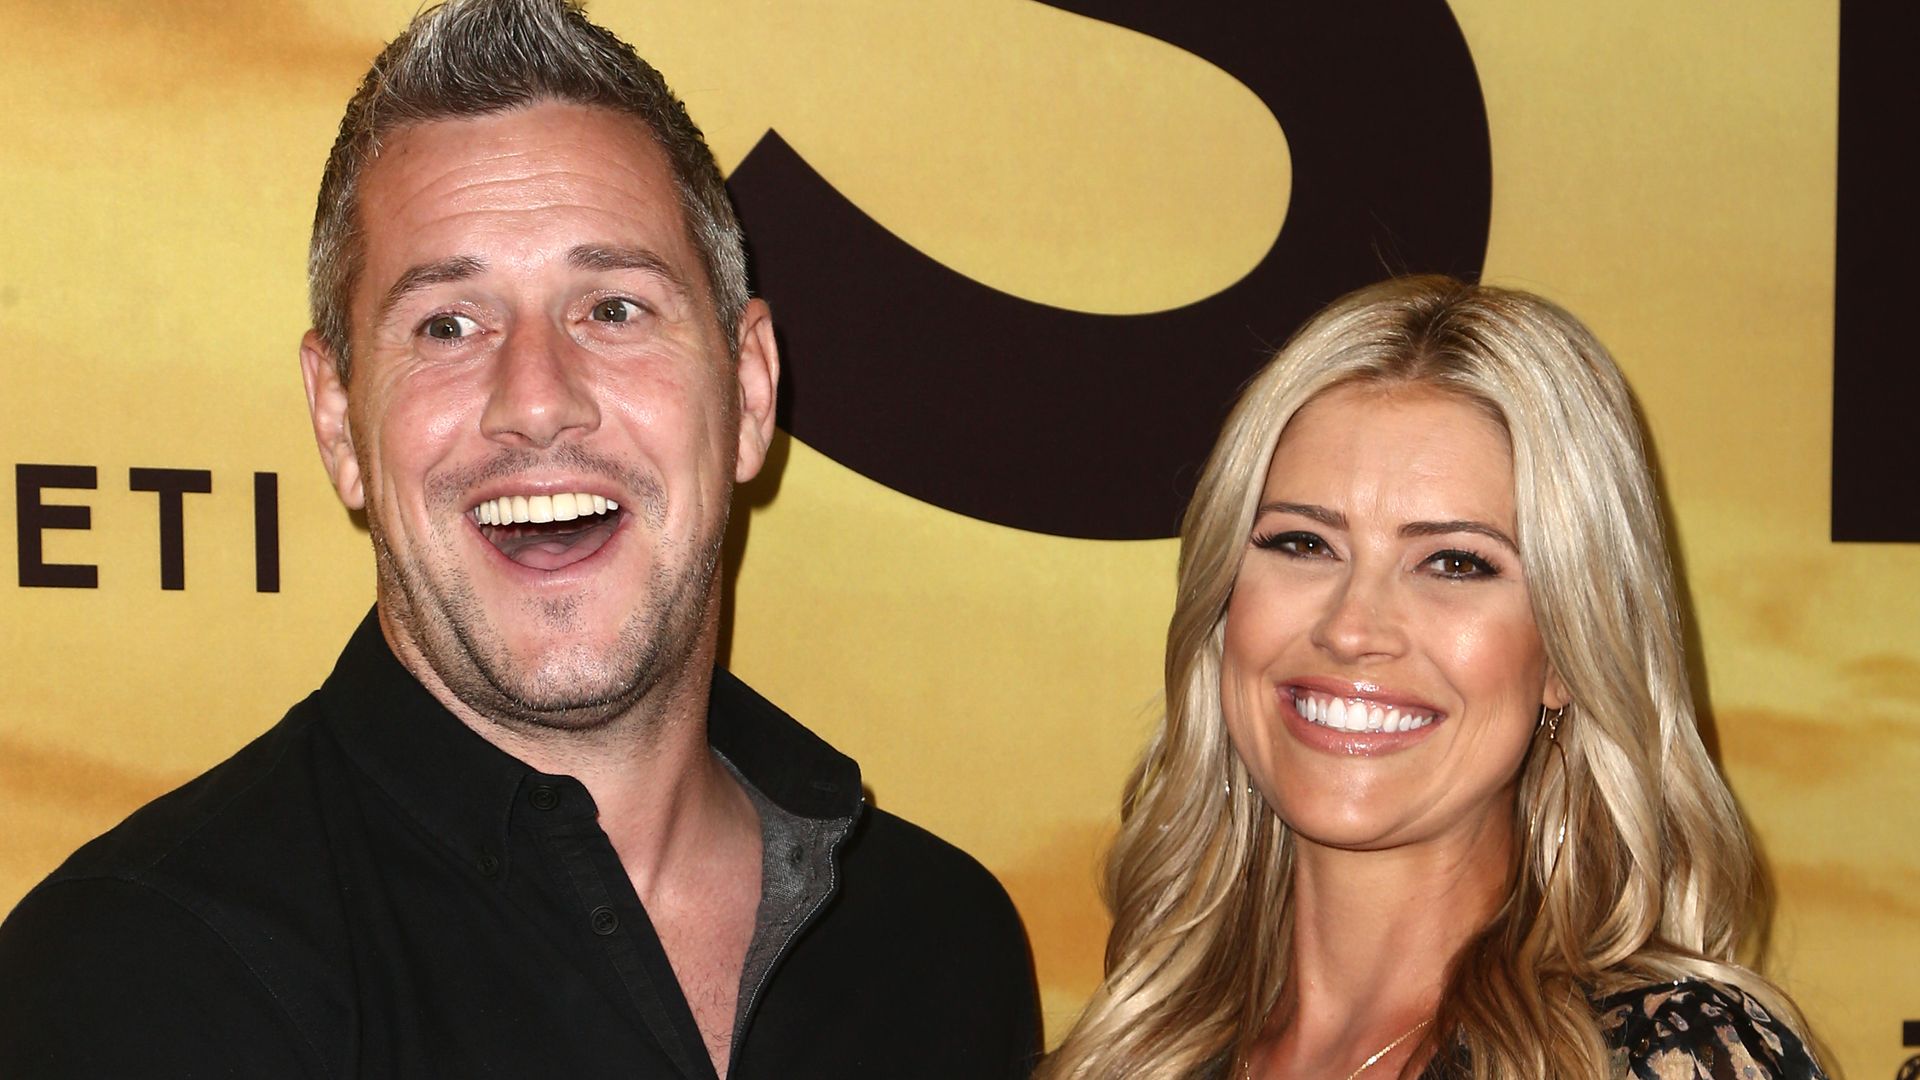 Ant ANstead and Christina Hall during happier times when married